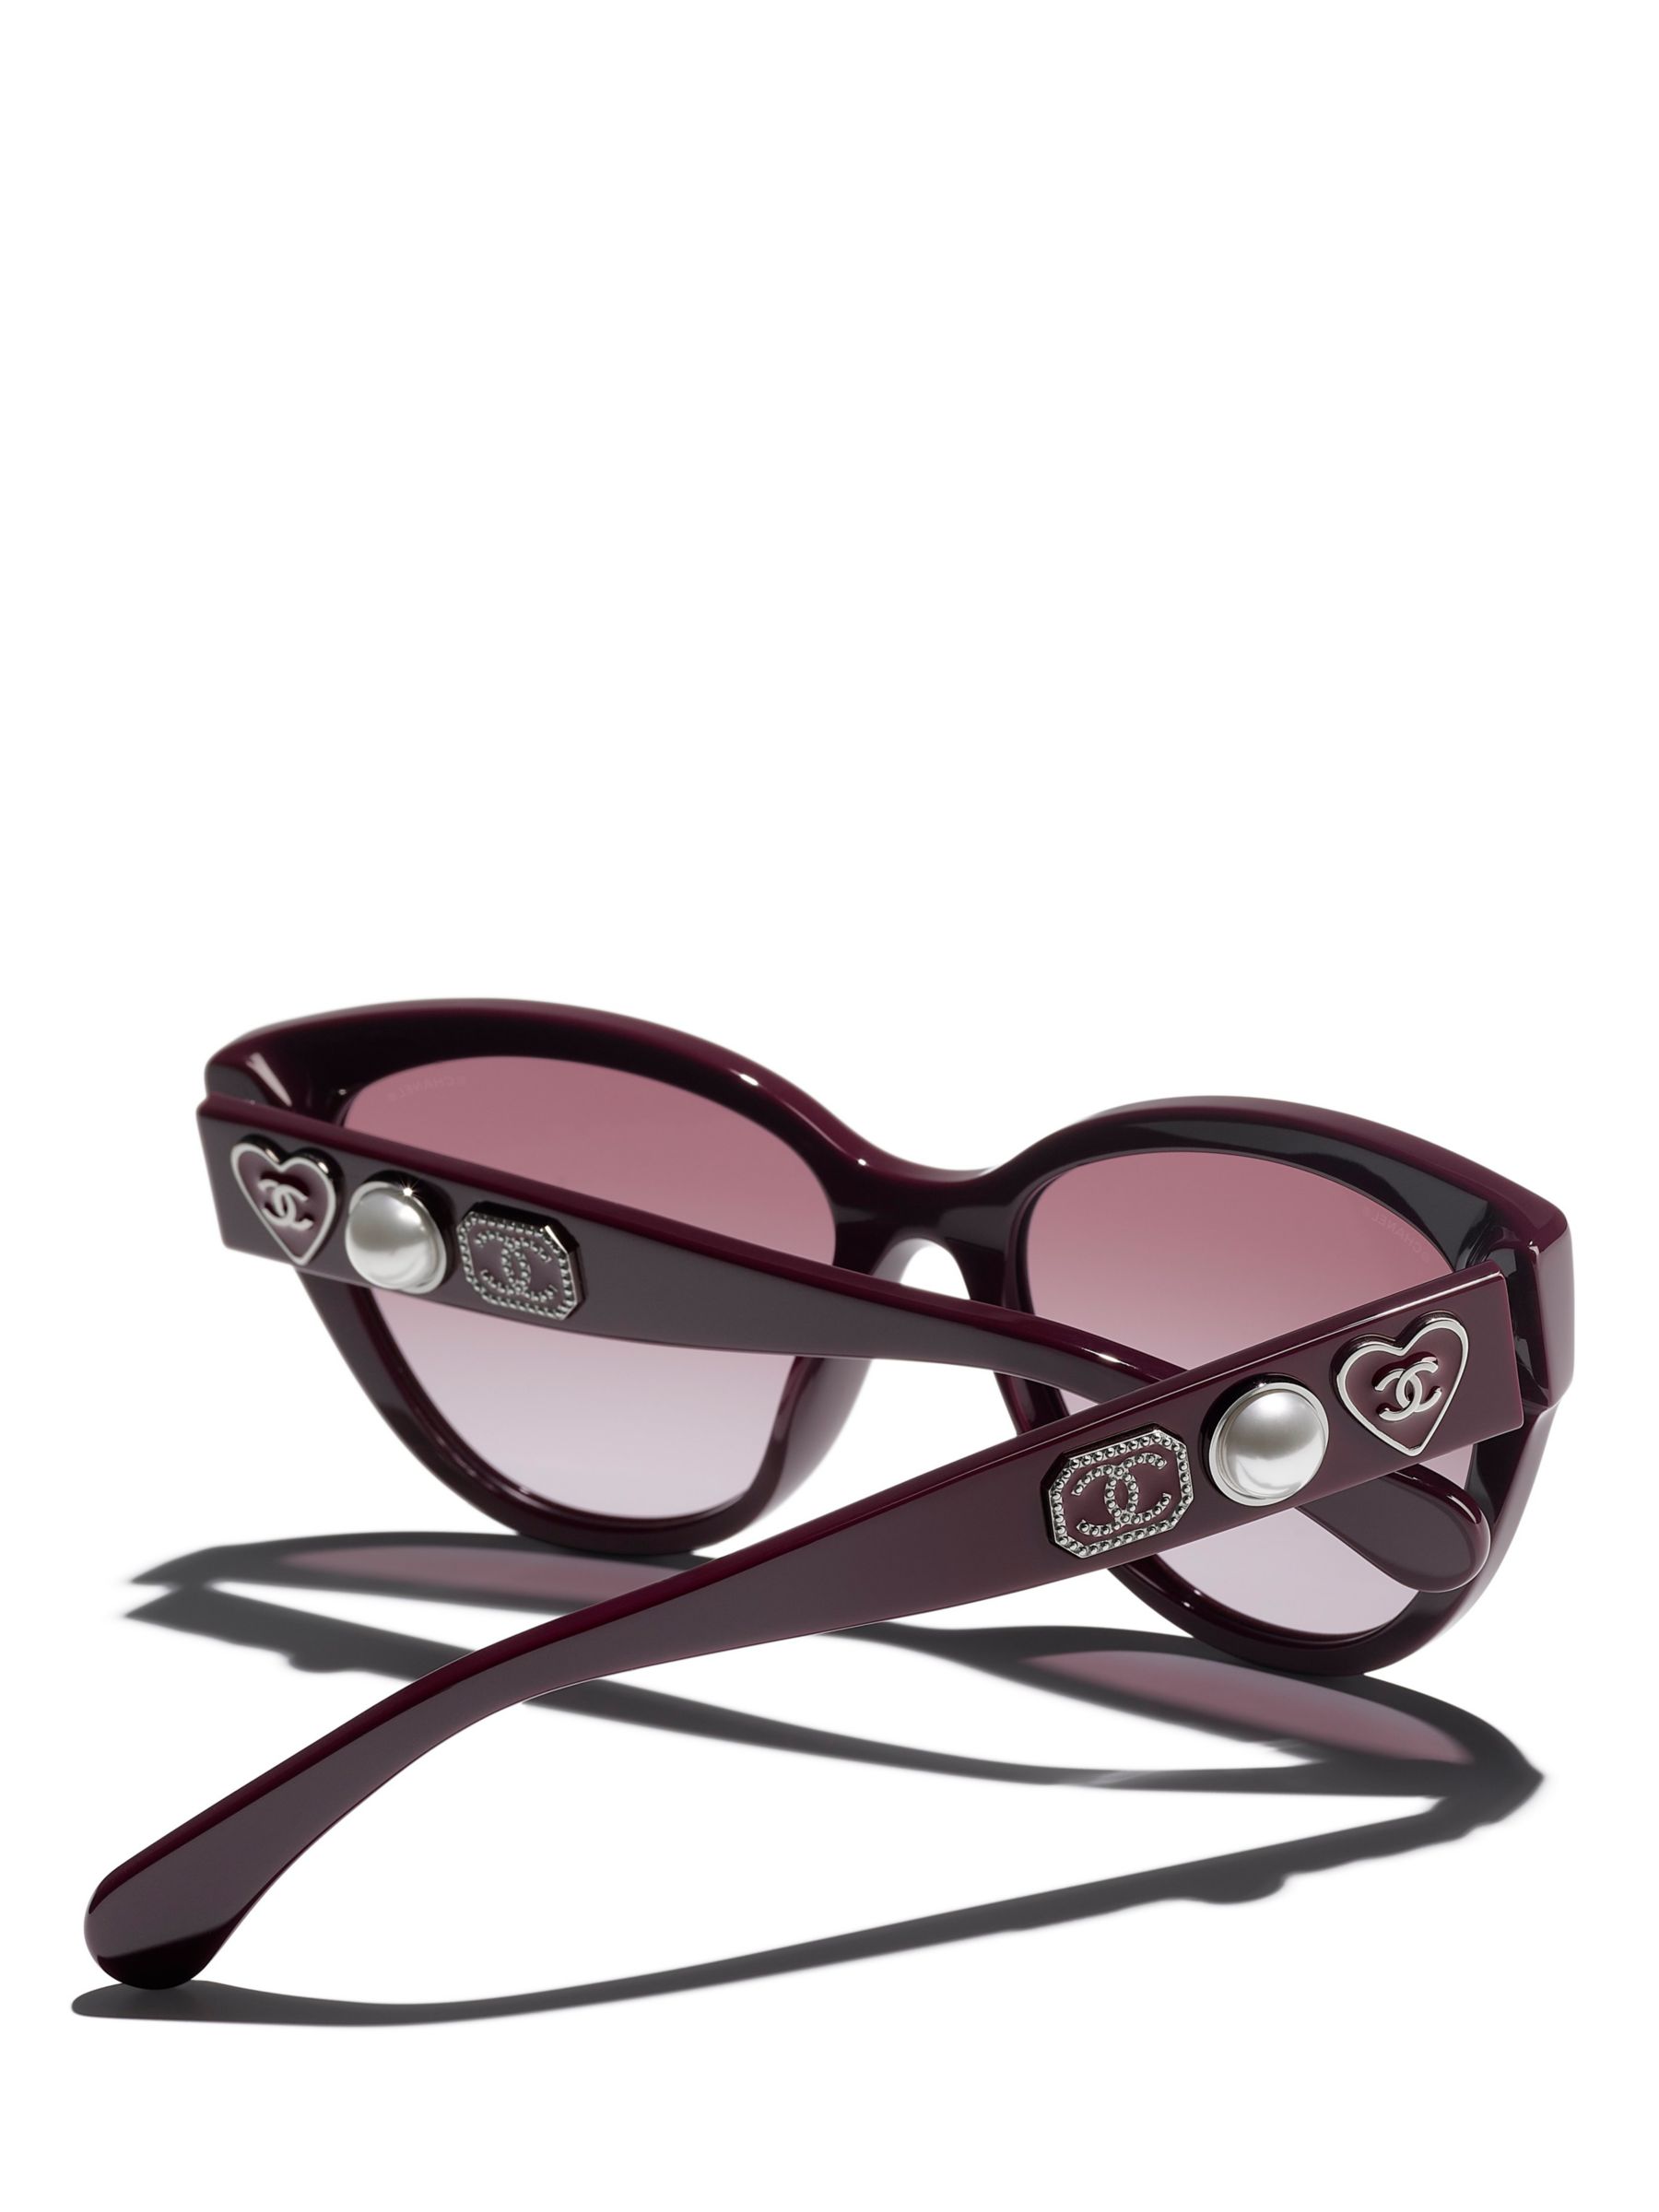 CHANEL CH5477 Women's Cat's Eye Sunglasses, Red at John Lewis